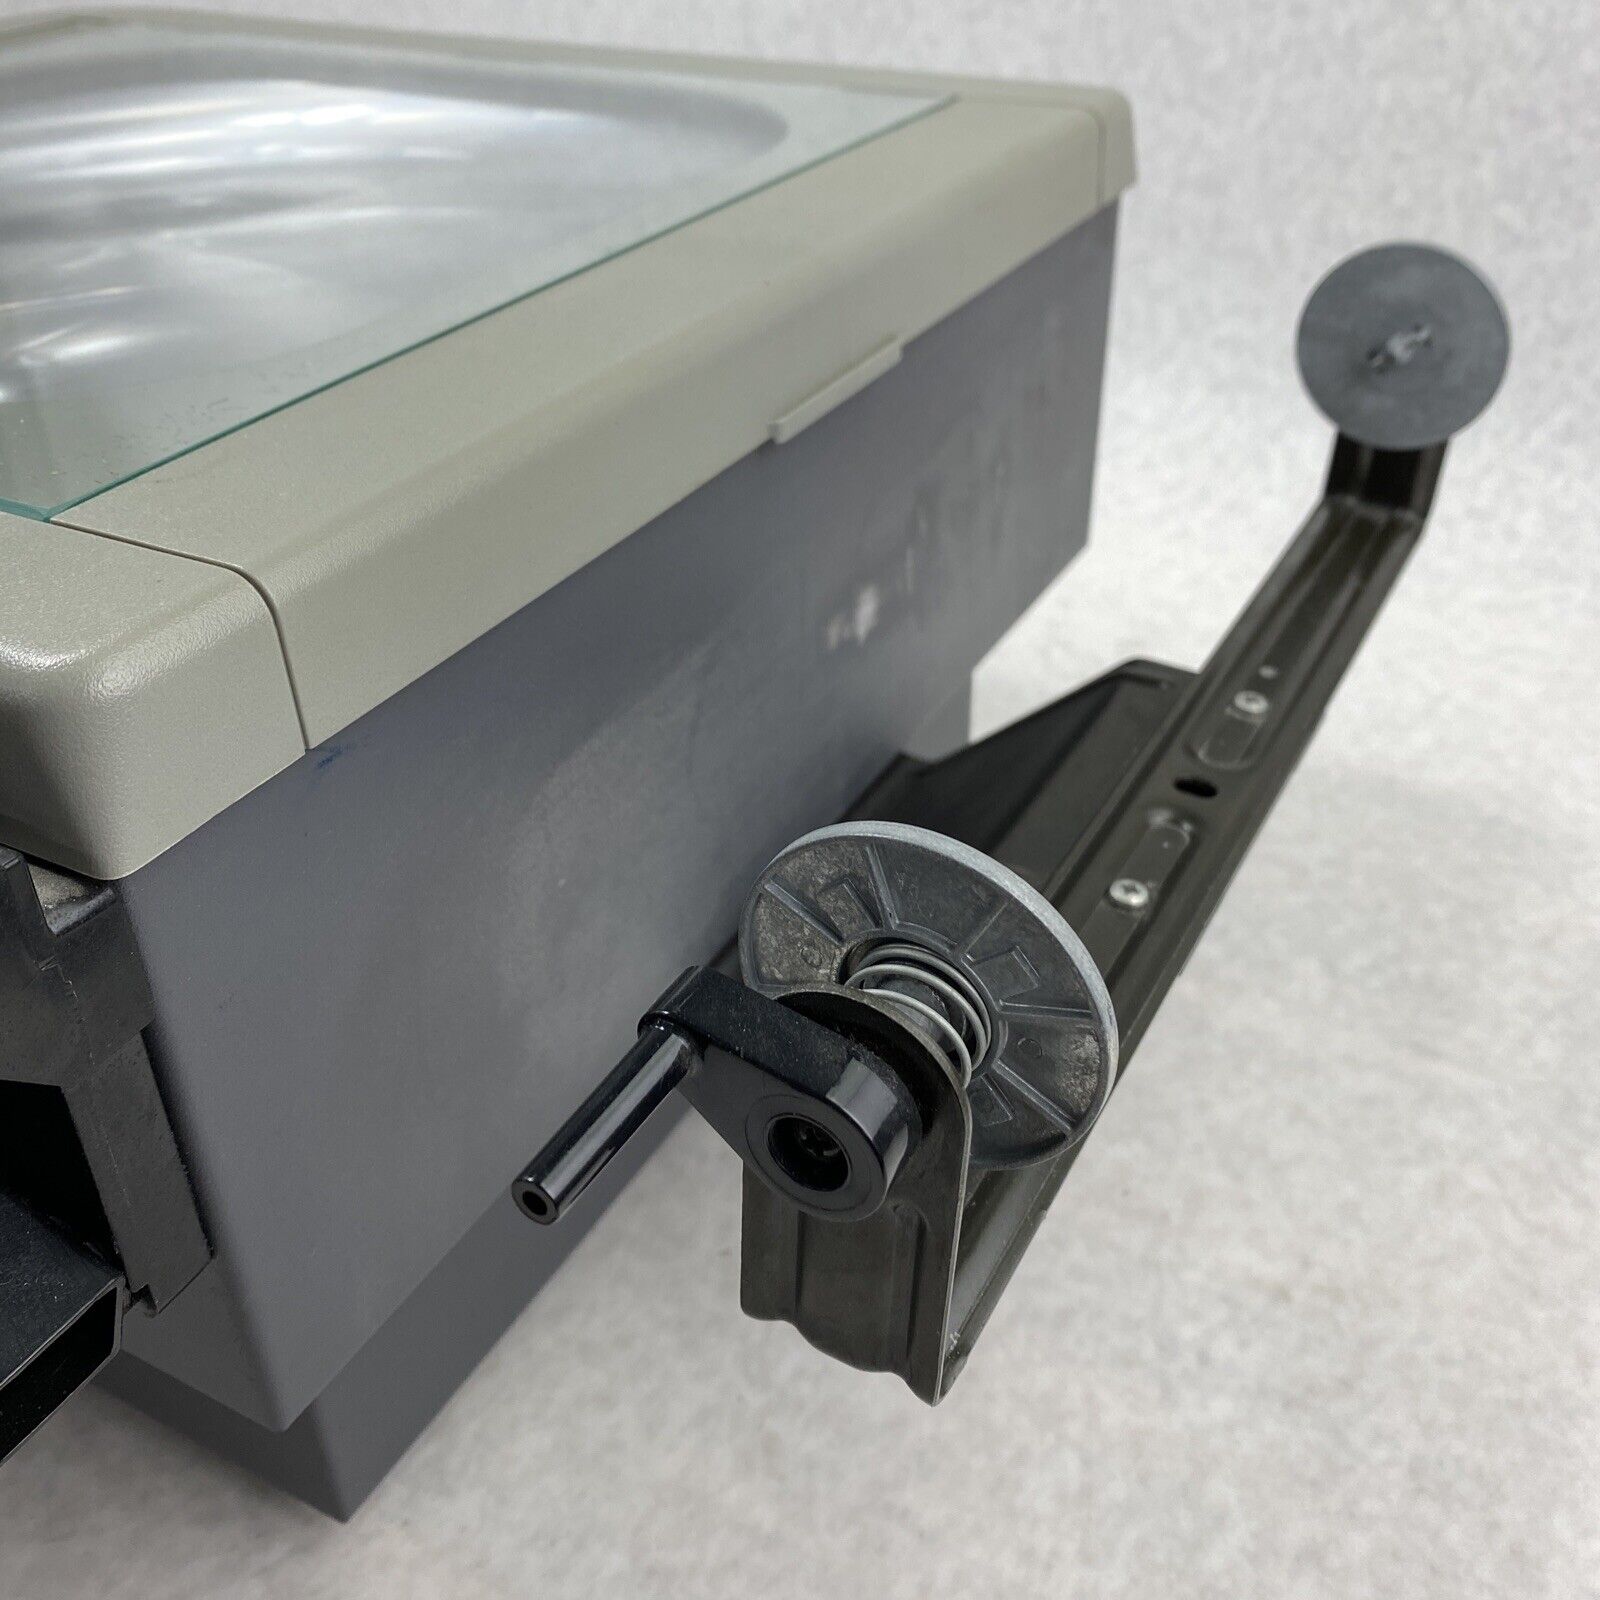 3M 9000AJA Overhead Transparency Projector 9050 WORKING with Rollers